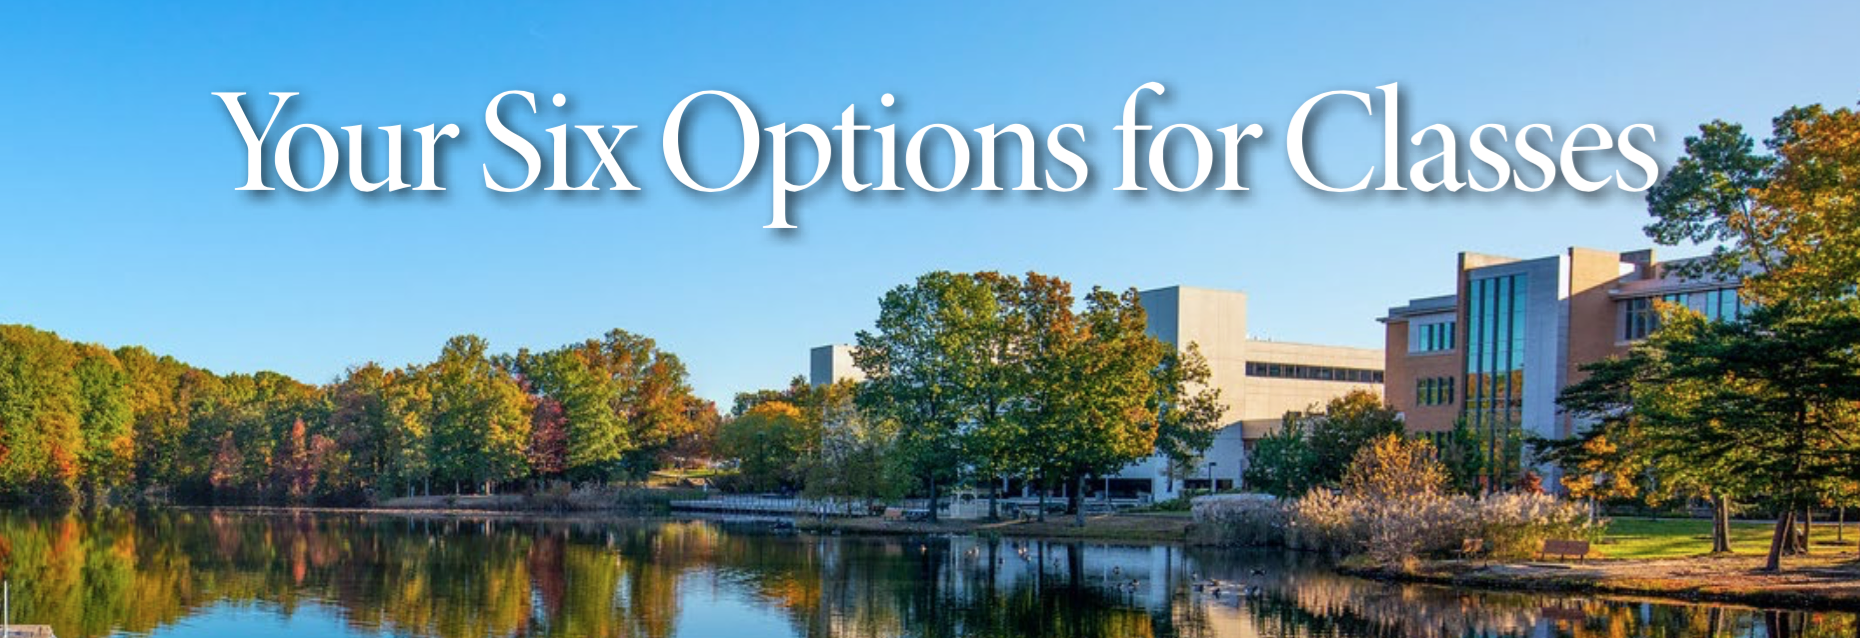 Your Six Options for Classes